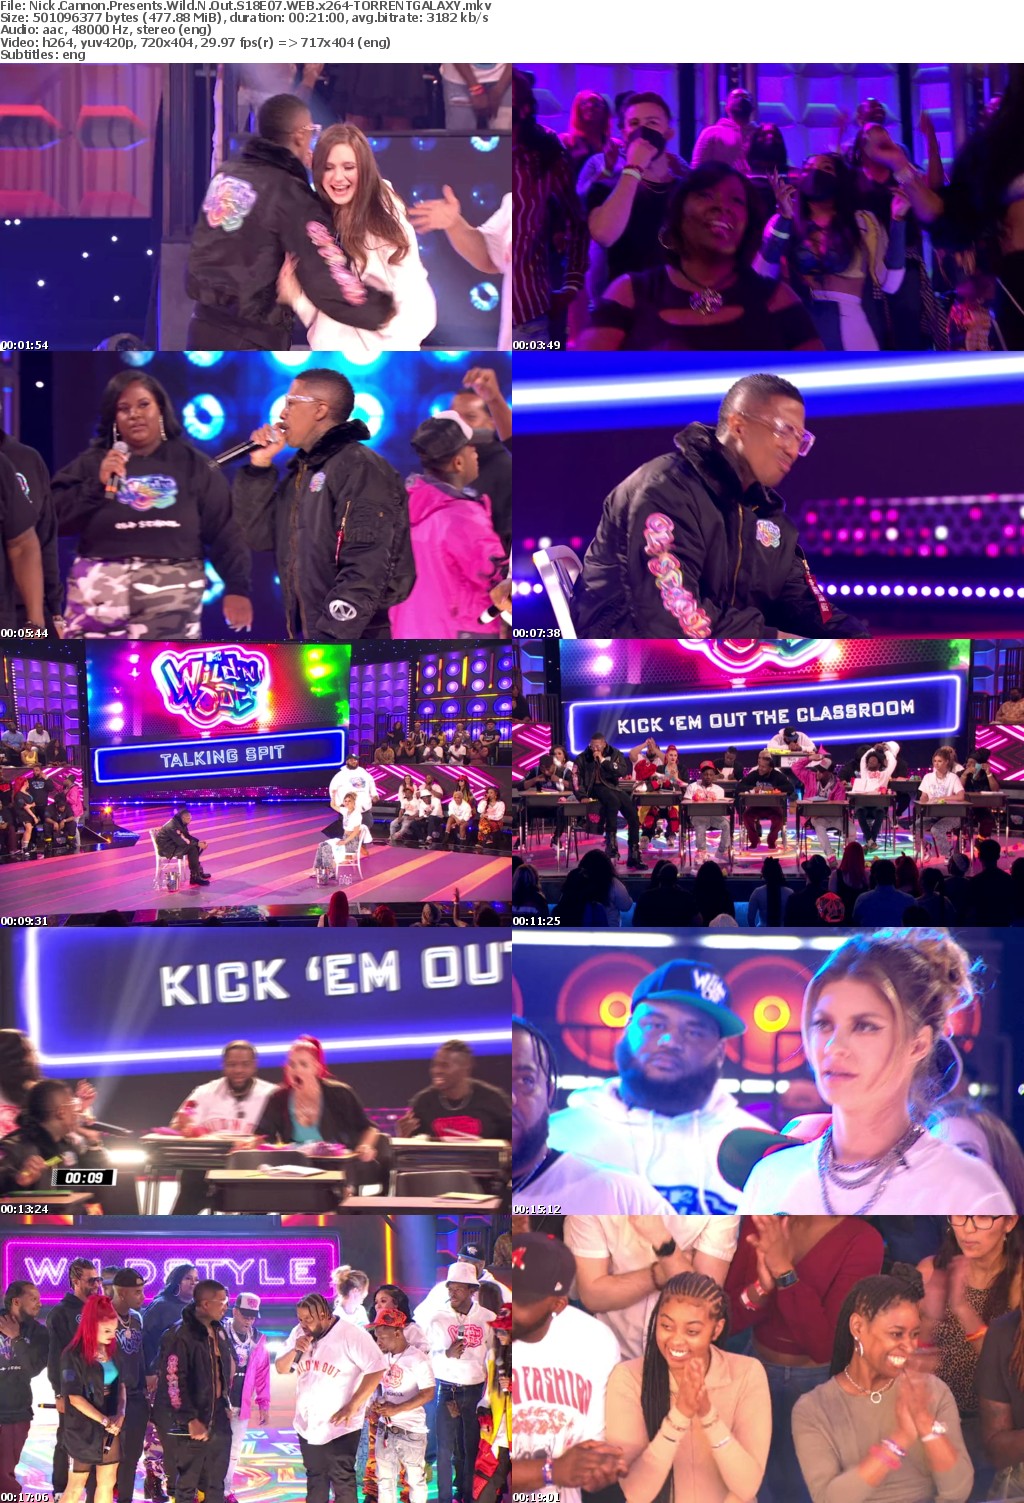 Nick Cannon Presents Wild N Out S18E07 WEB x264-GALAXY